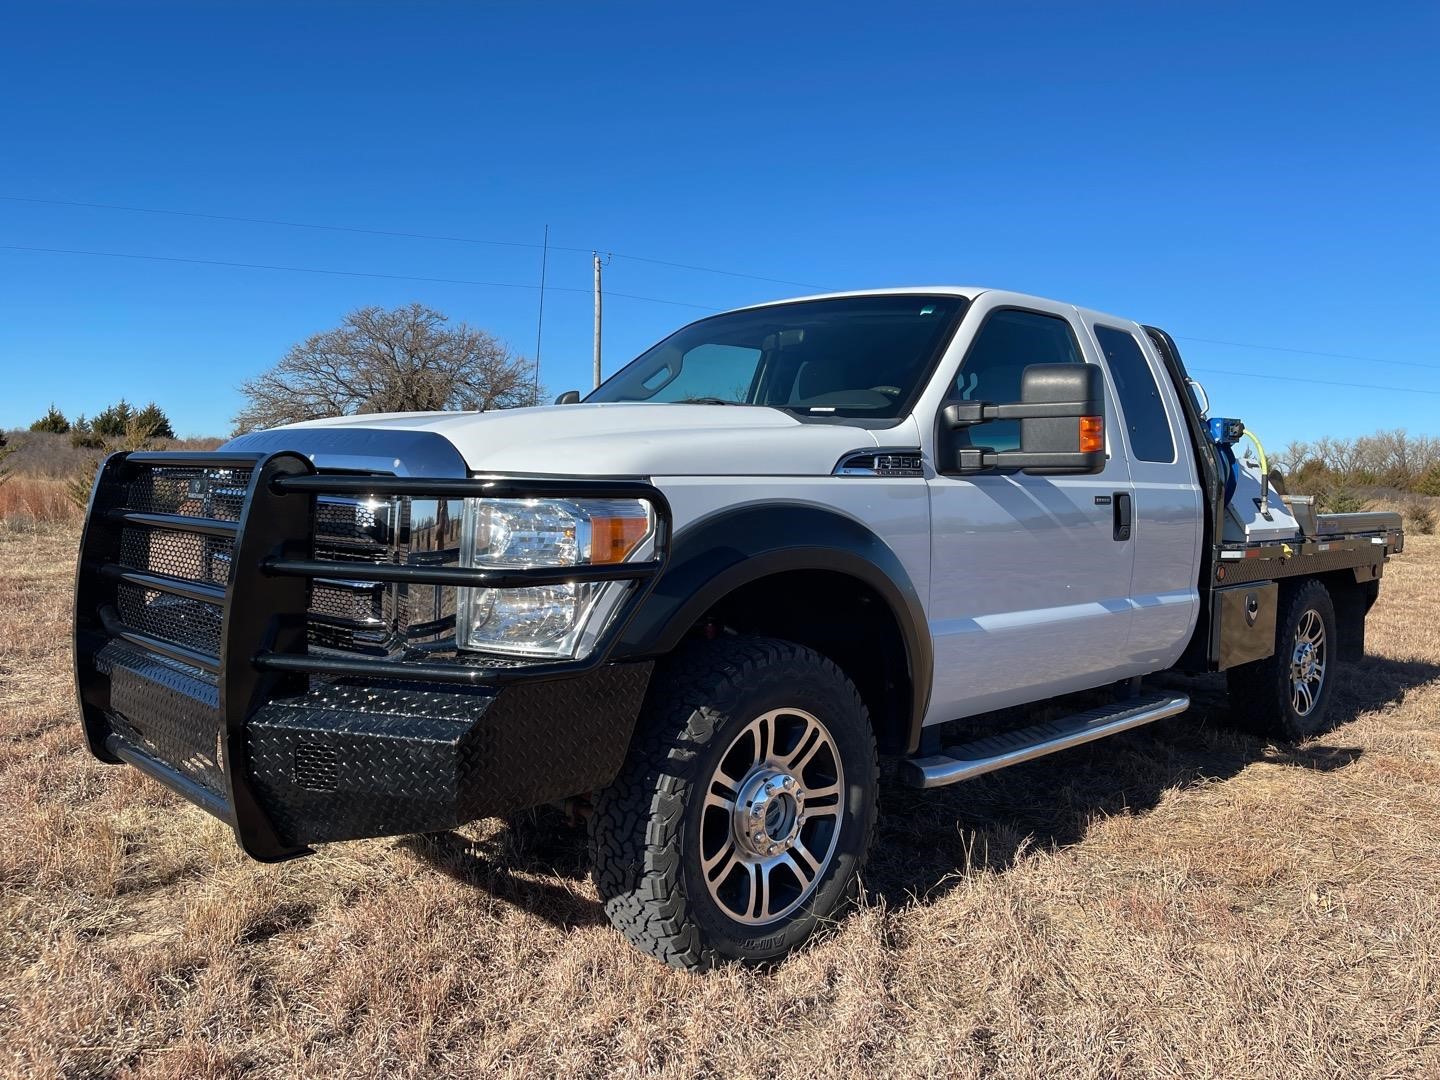 2011 Ford F350 Extended Cab Flatbed Pickup W/Bale Bed BigIron Auctions